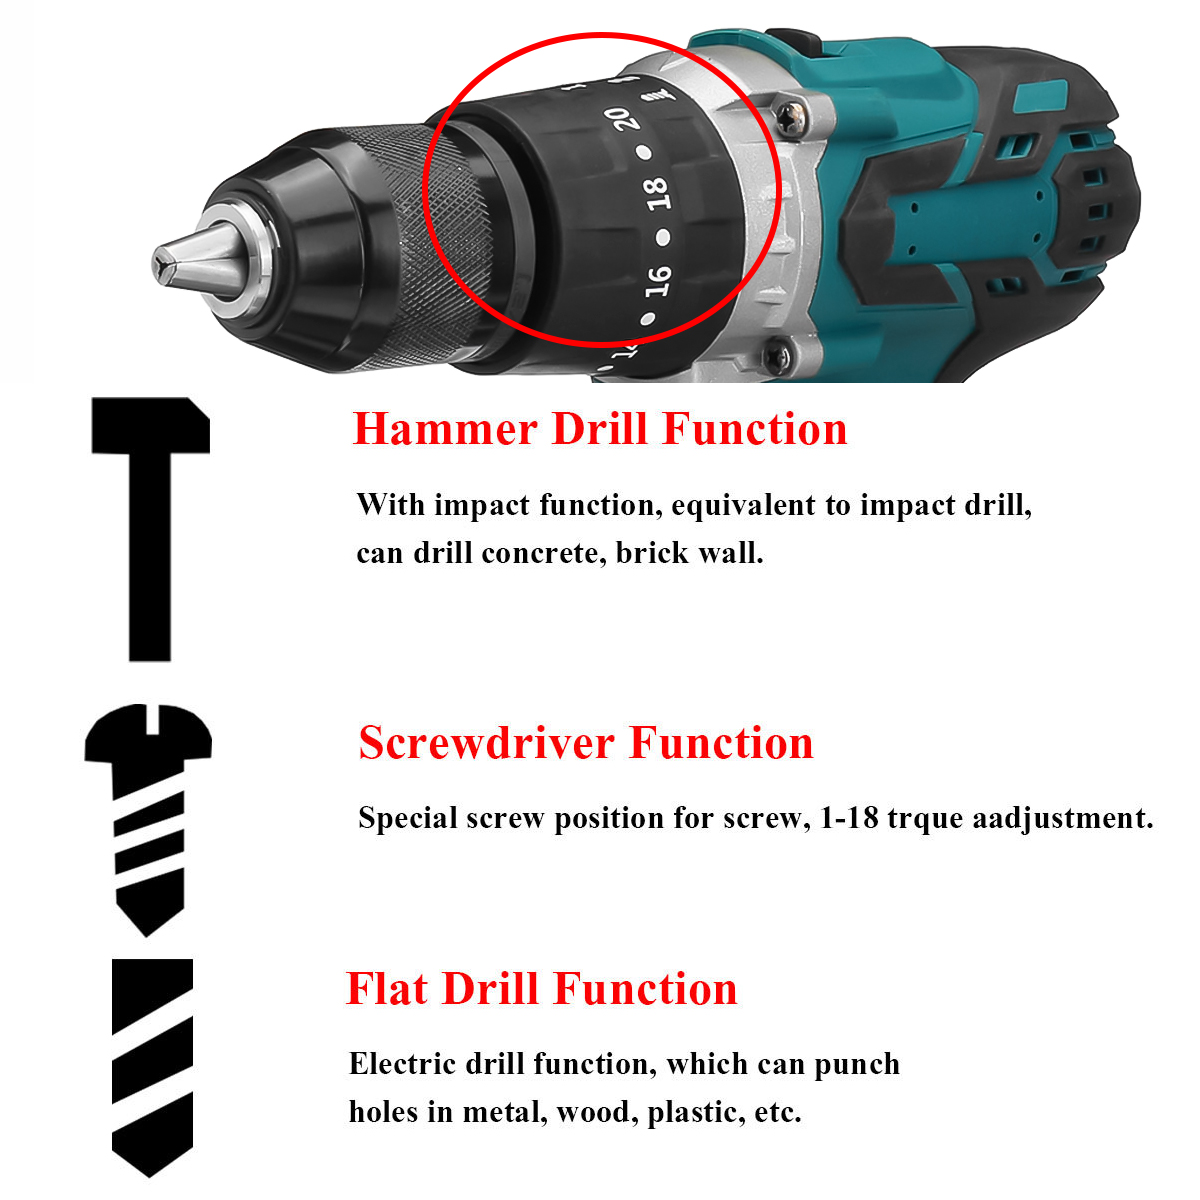 88VF-3-IN-1-Cordless-Brushless-Drill-Electric-Screwdriver-Hammer-Impact-Drill-203-Torque-W-12pcs-Bat-1854945-4